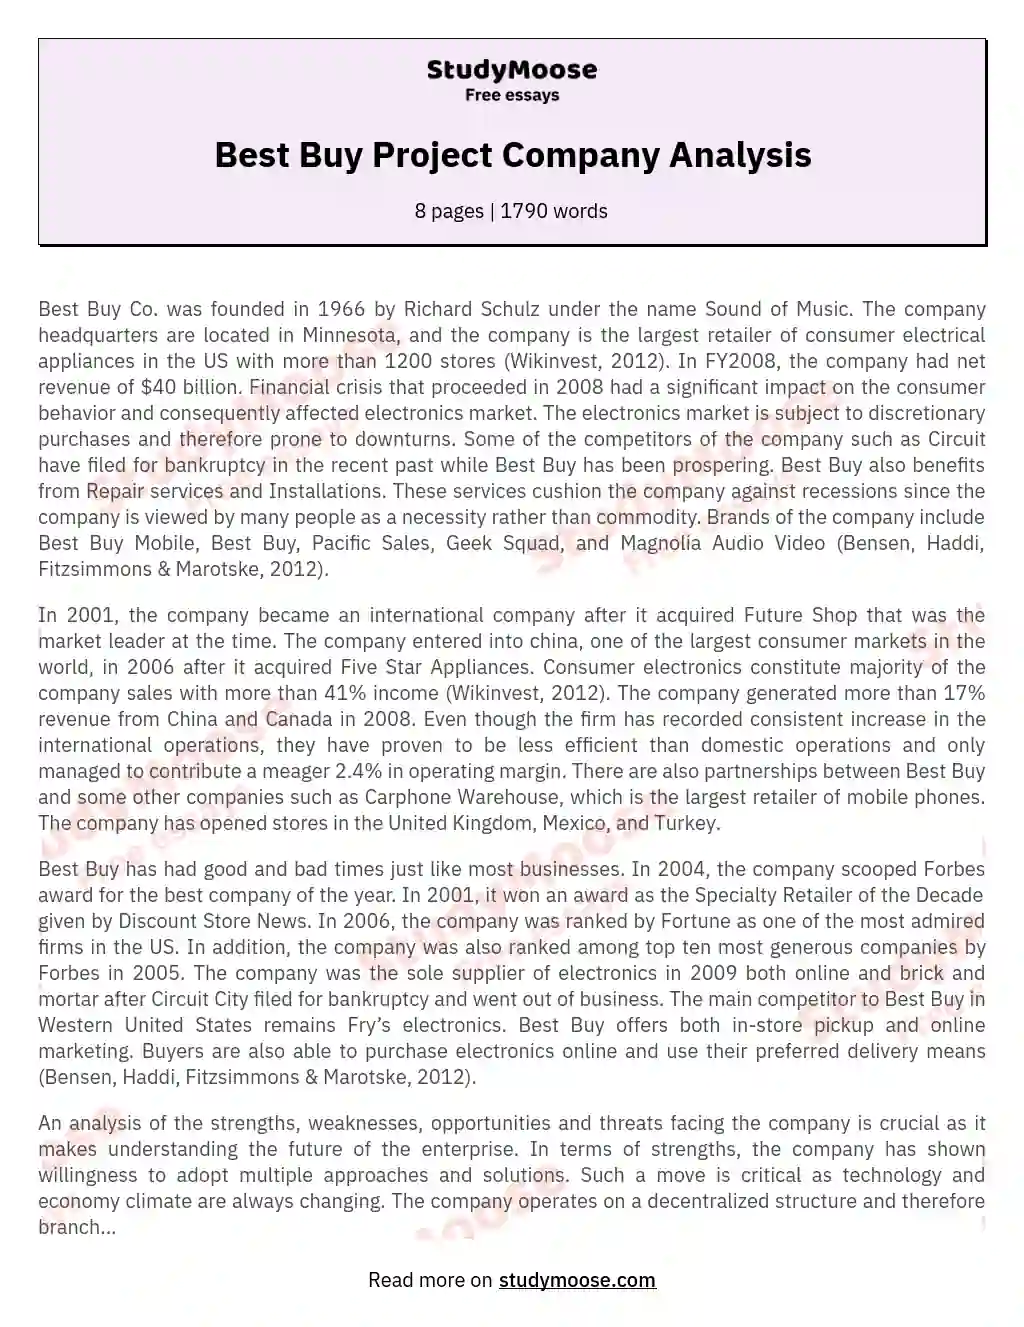 Best Buy Project Company Analysis essay